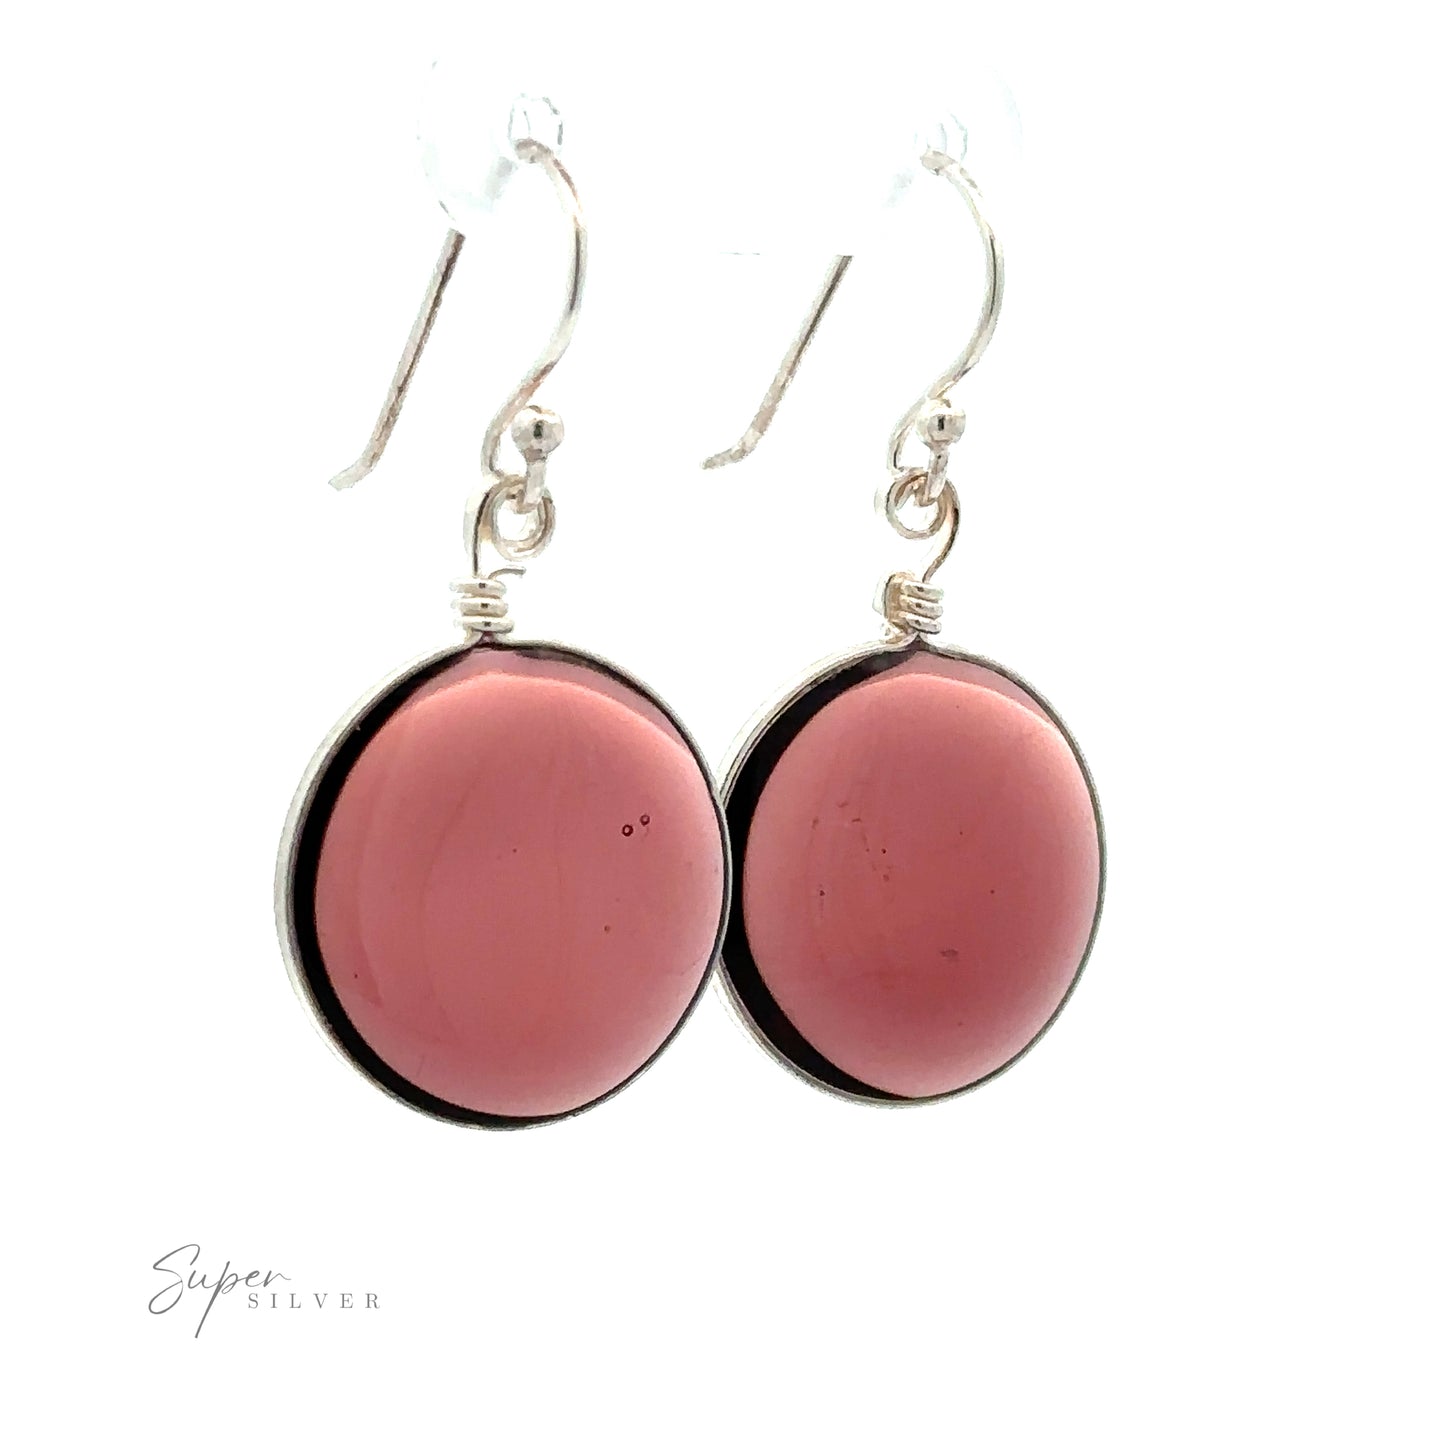 
                  
                    Close-up of a pair of silver hook earrings featuring large, round, pink stones in bezel settings, highlighting their .925 Sterling Silver composition with the text "Round Glass Earrings" in the bottom left corner.
                  
                